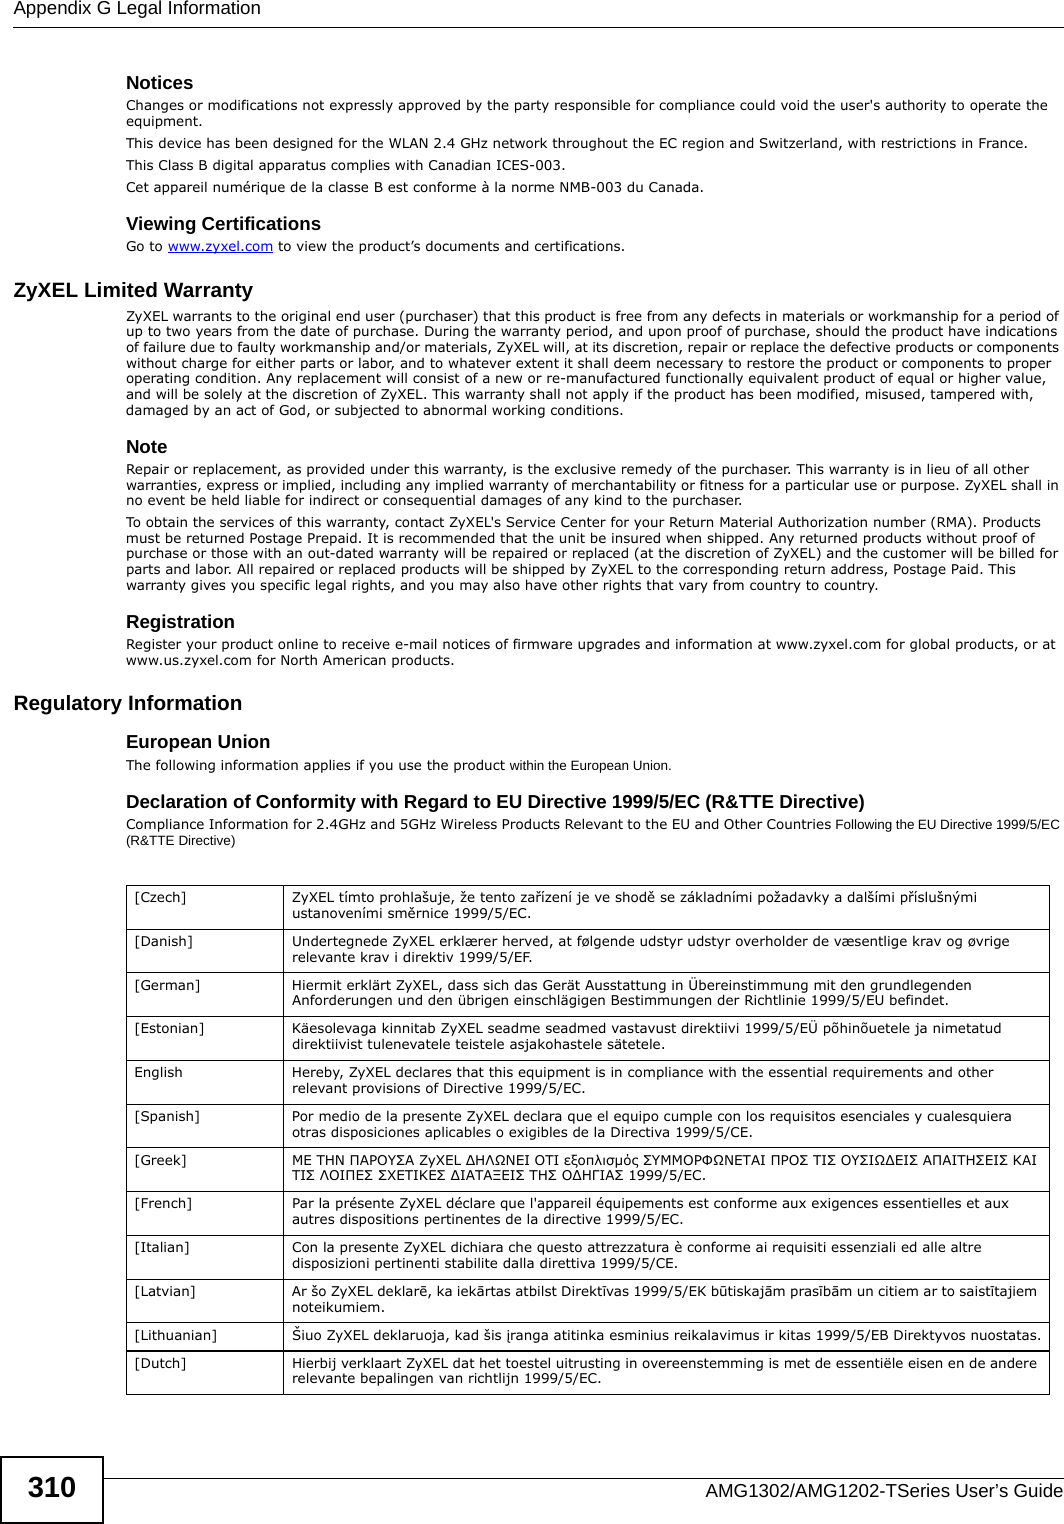 Appendix G Legal InformationAMG1302/AMG1202-TSeries User’s Guide310Notices Changes or modifications not expressly approved by the party responsible for compliance could void the user&apos;s authority to operate the equipment.This device has been designed for the WLAN 2.4 GHz network throughout the EC region and Switzerland, with restrictions in France. This Class B digital apparatus complies with Canadian ICES-003.Cet appareil numérique de la classe B est conforme à la norme NMB-003 du Canada.Viewing CertificationsGo to www.zyxel.com to view the product’s documents and certifications.ZyXEL Limited WarrantyZyXEL warrants to the original end user (purchaser) that this product is free from any defects in materials or workmanship for a period of up to two years from the date of purchase. During the warranty period, and upon proof of purchase, should the product have indications of failure due to faulty workmanship and/or materials, ZyXEL will, at its discretion, repair or replace the defective products or components without charge for either parts or labor, and to whatever extent it shall deem necessary to restore the product or components to proper operating condition. Any replacement will consist of a new or re-manufactured functionally equivalent product of equal or higher value, and will be solely at the discretion of ZyXEL. This warranty shall not apply if the product has been modified, misused, tampered with, damaged by an act of God, or subjected to abnormal working conditions.NoteRepair or replacement, as provided under this warranty, is the exclusive remedy of the purchaser. This warranty is in lieu of all other warranties, express or implied, including any implied warranty of merchantability or fitness for a particular use or purpose. ZyXEL shall in no event be held liable for indirect or consequential damages of any kind to the purchaser.To obtain the services of this warranty, contact ZyXEL&apos;s Service Center for your Return Material Authorization number (RMA). Products must be returned Postage Prepaid. It is recommended that the unit be insured when shipped. Any returned products without proof of purchase or those with an out-dated warranty will be repaired or replaced (at the discretion of ZyXEL) and the customer will be billed for parts and labor. All repaired or replaced products will be shipped by ZyXEL to the corresponding return address, Postage Paid. This warranty gives you specific legal rights, and you may also have other rights that vary from country to country.RegistrationRegister your product online to receive e-mail notices of firmware upgrades and information at www.zyxel.com for global products, or at www.us.zyxel.com for North American products.Regulatory InformationEuropean UnionThe following information applies if you use the product within the European Union.Declaration of Conformity with Regard to EU Directive 1999/5/EC (R&amp;TTE Directive)Compliance Information for 2.4GHz and 5GHz Wireless Products Relevant to the EU and Other Countries Following the EU Directive 1999/5/EC (R&amp;TTE Directive) [Czech] ZyXEL tímto prohlašuje, že tento zařízení je ve shodě se základními požadavky a dalšími příslušnými ustanoveními směrnice 1999/5/EC.[Danish] Undertegnede ZyXEL erklærer herved, at følgende udstyr udstyr overholder de væsentlige krav og øvrige relevante krav i direktiv 1999/5/EF.[German] Hiermit erklärt ZyXEL, dass sich das Gerät Ausstattung in Übereinstimmung mit den grundlegenden Anforderungen und den übrigen einschlägigen Bestimmungen der Richtlinie 1999/5/EU befindet.[Estonian] Käesolevaga kinnitab ZyXEL seadme seadmed vastavust direktiivi 1999/5/EÜ põhinõuetele ja nimetatud direktiivist tulenevatele teistele asjakohastele sätetele.English Hereby, ZyXEL declares that this equipment is in compliance with the essential requirements and other relevant provisions of Directive 1999/5/EC.[Spanish] Por medio de la presente ZyXEL declara que el equipo cumple con los requisitos esenciales y cualesquiera otras disposiciones aplicables o exigibles de la Directiva 1999/5/CE.[Greek] ΜΕ ΤΗΝ ΠΑΡΟΥΣΑ ZyXEL ∆ΗΛΩΝΕΙ ΟΤΙ εξοπλισμός ΣΥΜΜΟΡΦΩΝΕΤΑΙ ΠΡΟΣ ΤΙΣ ΟΥΣΙΩ∆ΕΙΣ ΑΠΑΙΤΗΣΕΙΣ ΚΑΙ ΤΙΣ ΛΟΙΠΕΣ ΣΧΕΤΙΚΕΣ ∆ΙΑΤΑΞΕΙΣ ΤΗΣ Ο∆ΗΓΙΑΣ 1999/5/ΕC.[French] Par la présente ZyXEL déclare que l&apos;appareil équipements est conforme aux exigences essentielles et aux autres dispositions pertinentes de la directive 1999/5/EC.[Italian] Con la presente ZyXEL dichiara che questo attrezzatura è conforme ai requisiti essenziali ed alle altre disposizioni pertinenti stabilite dalla direttiva 1999/5/CE.[Latvian] Ar šo ZyXEL deklarē, ka iekārtas atbilst Direktīvas 1999/5/EK būtiskajām prasībām un citiem ar to saistītajiem noteikumiem.[Lithuanian]  Šiuo ZyXEL deklaruoja, kad šis įranga atitinka esminius reikalavimus ir kitas 1999/5/EB Direktyvos nuostatas.[Dutch] Hierbij verklaart ZyXEL dat het toestel uitrusting in overeenstemming is met de essentiële eisen en de andere relevante bepalingen van richtlijn 1999/5/EC.